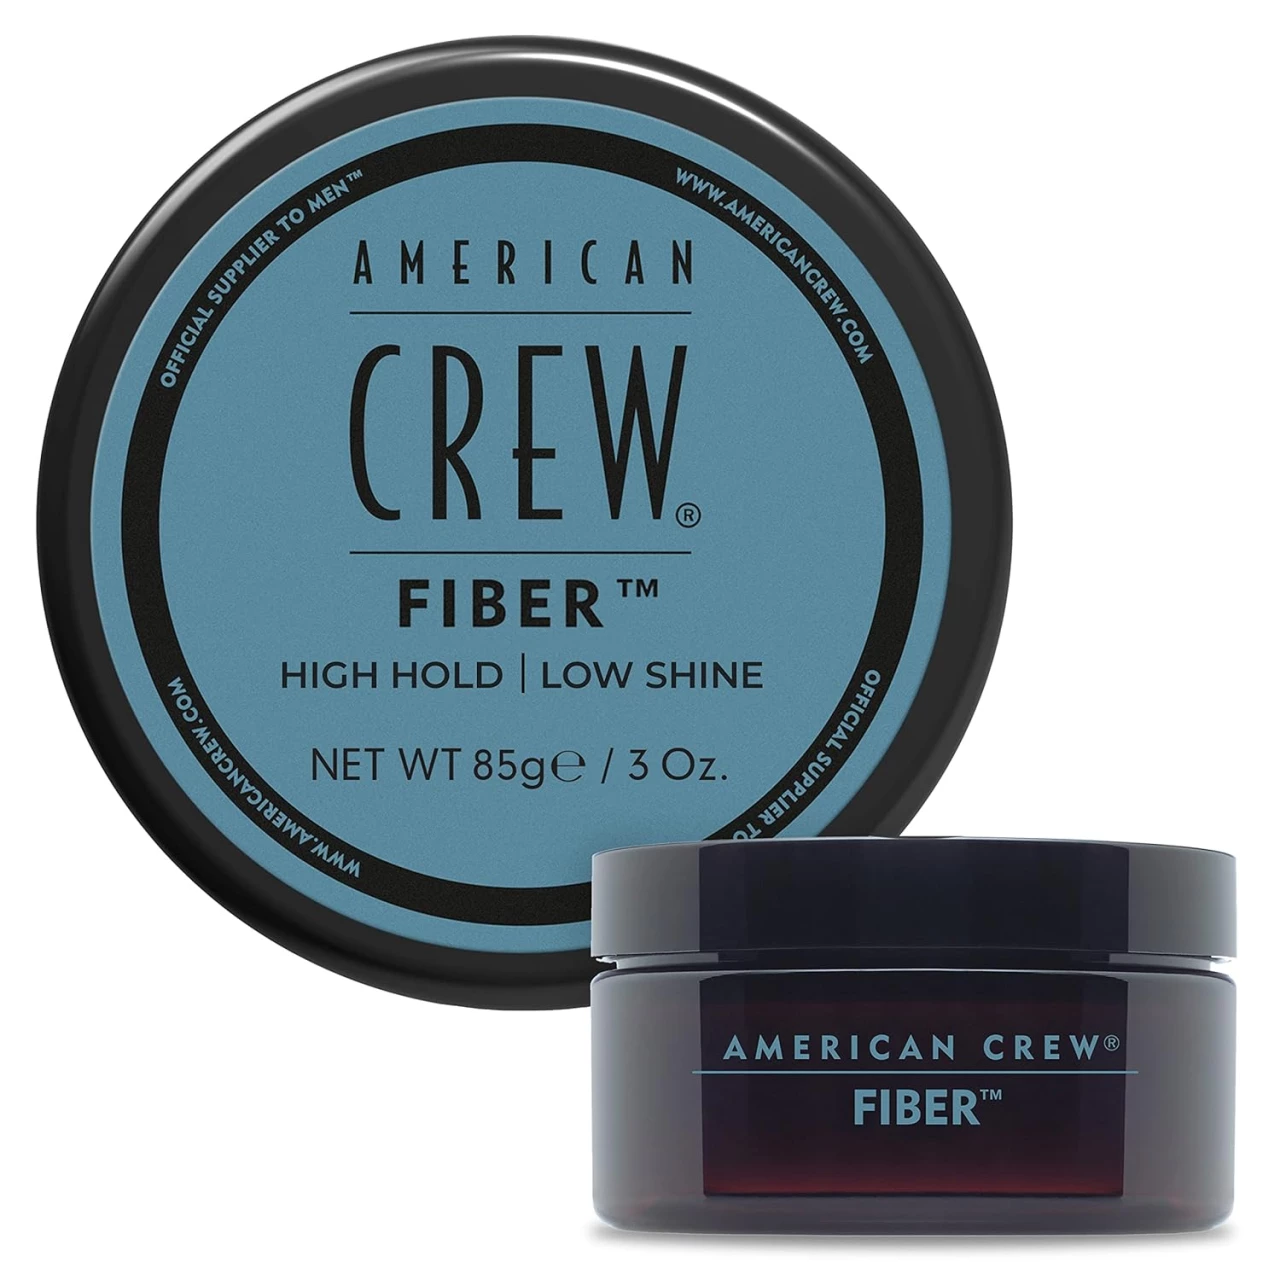 AMERICAN CREW Men&rsquo;s Hair Fiber (OLD VERSION), Like Hair Gel with High Hold with Low Shine, 3 Oz (Pack of 1)